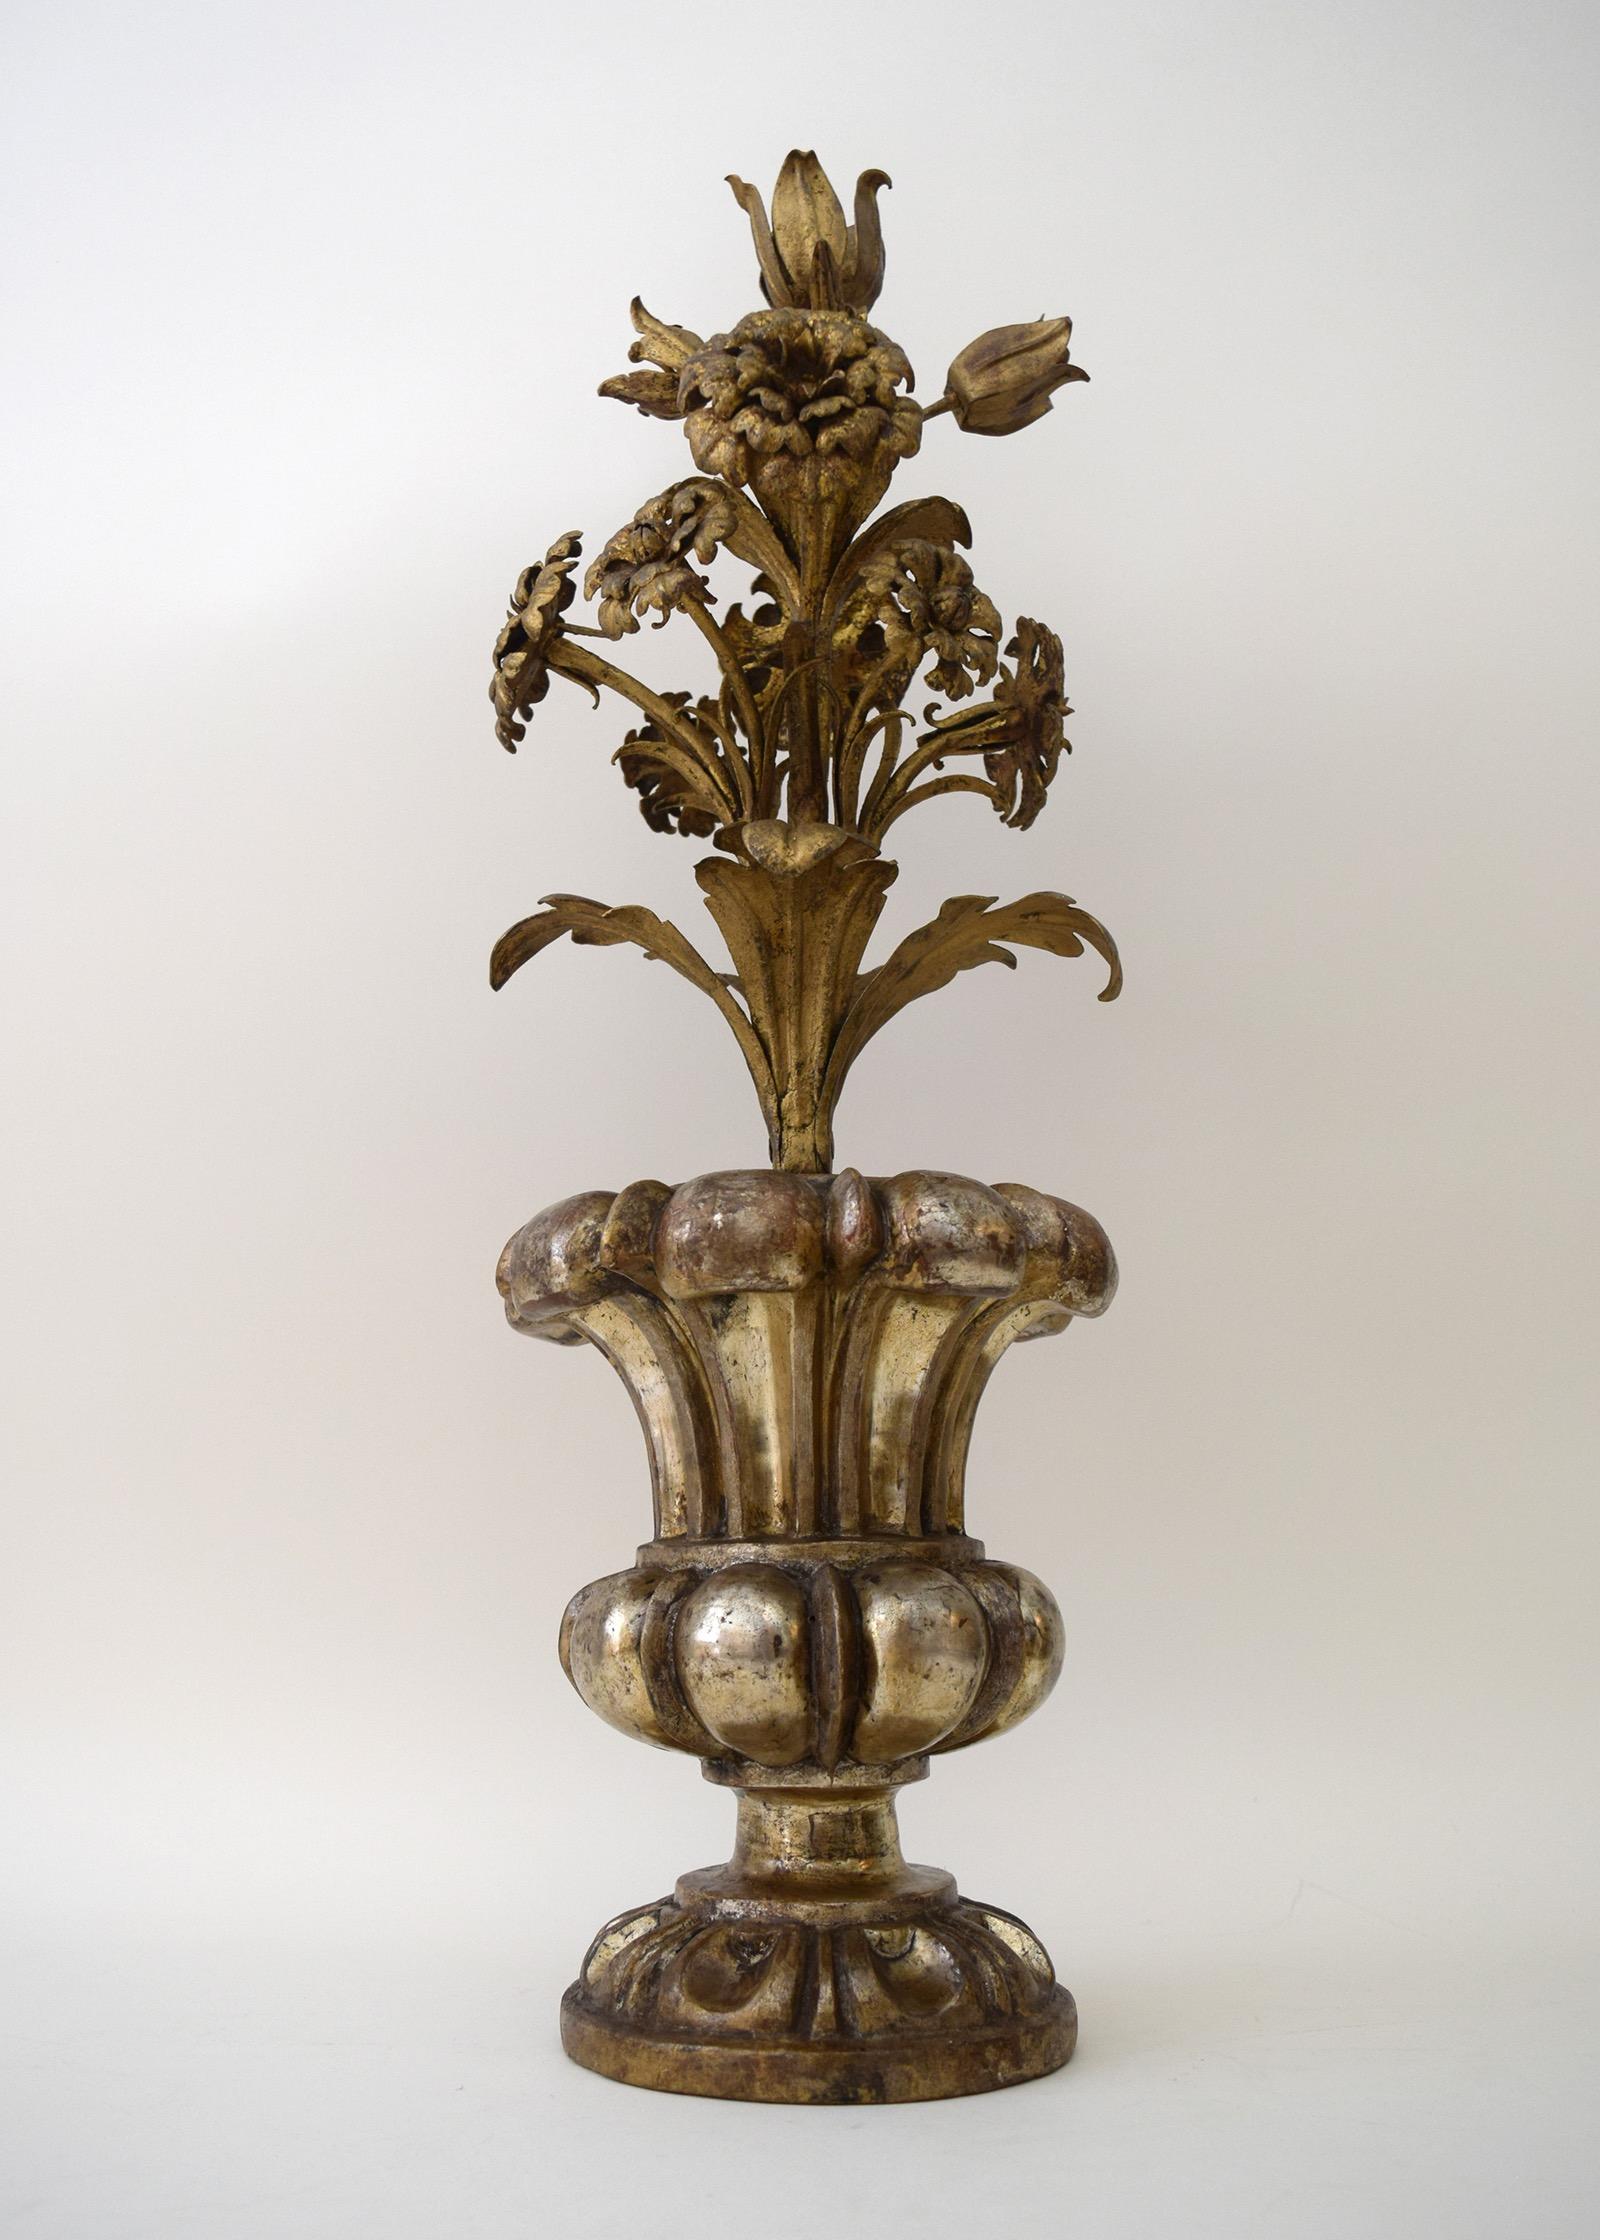 Baroque Silver and Gold Sculpture of a Flowering Urn